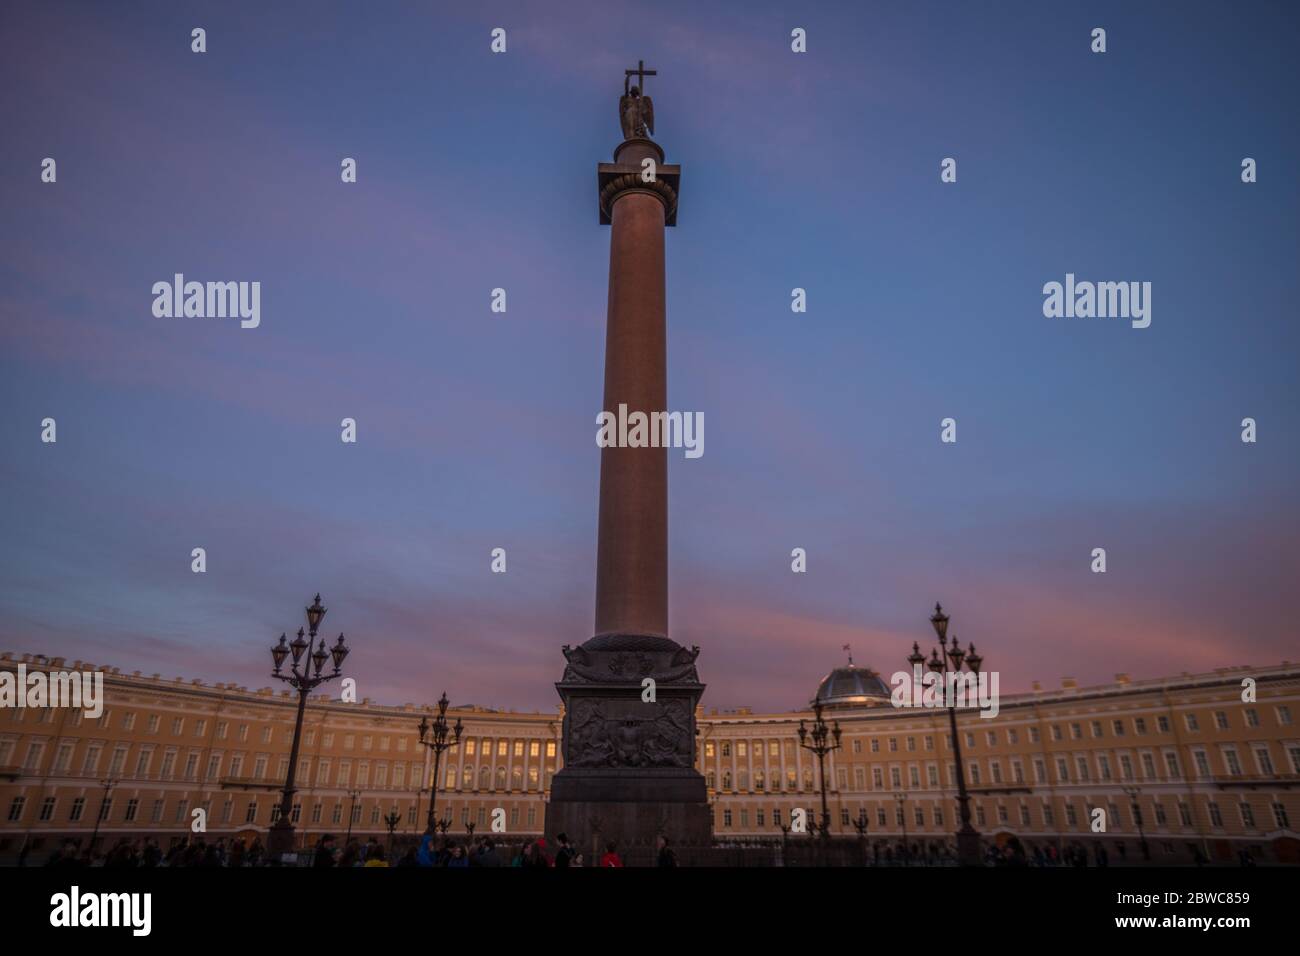 Sunset in Palace Square in Saint Petersburg Stock Photo